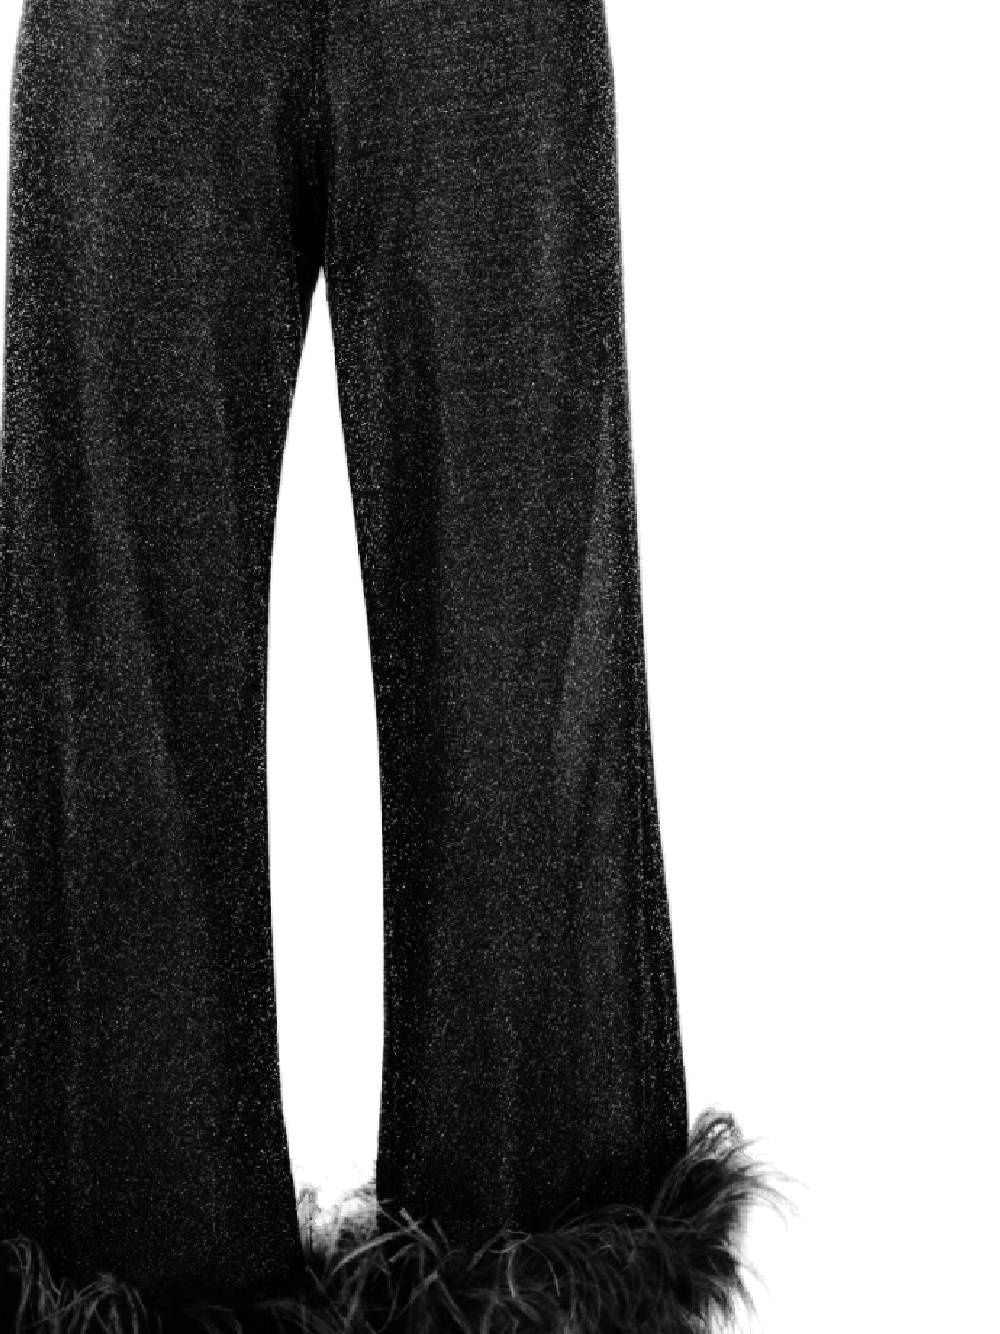 Women's trousers with ostrich feathers